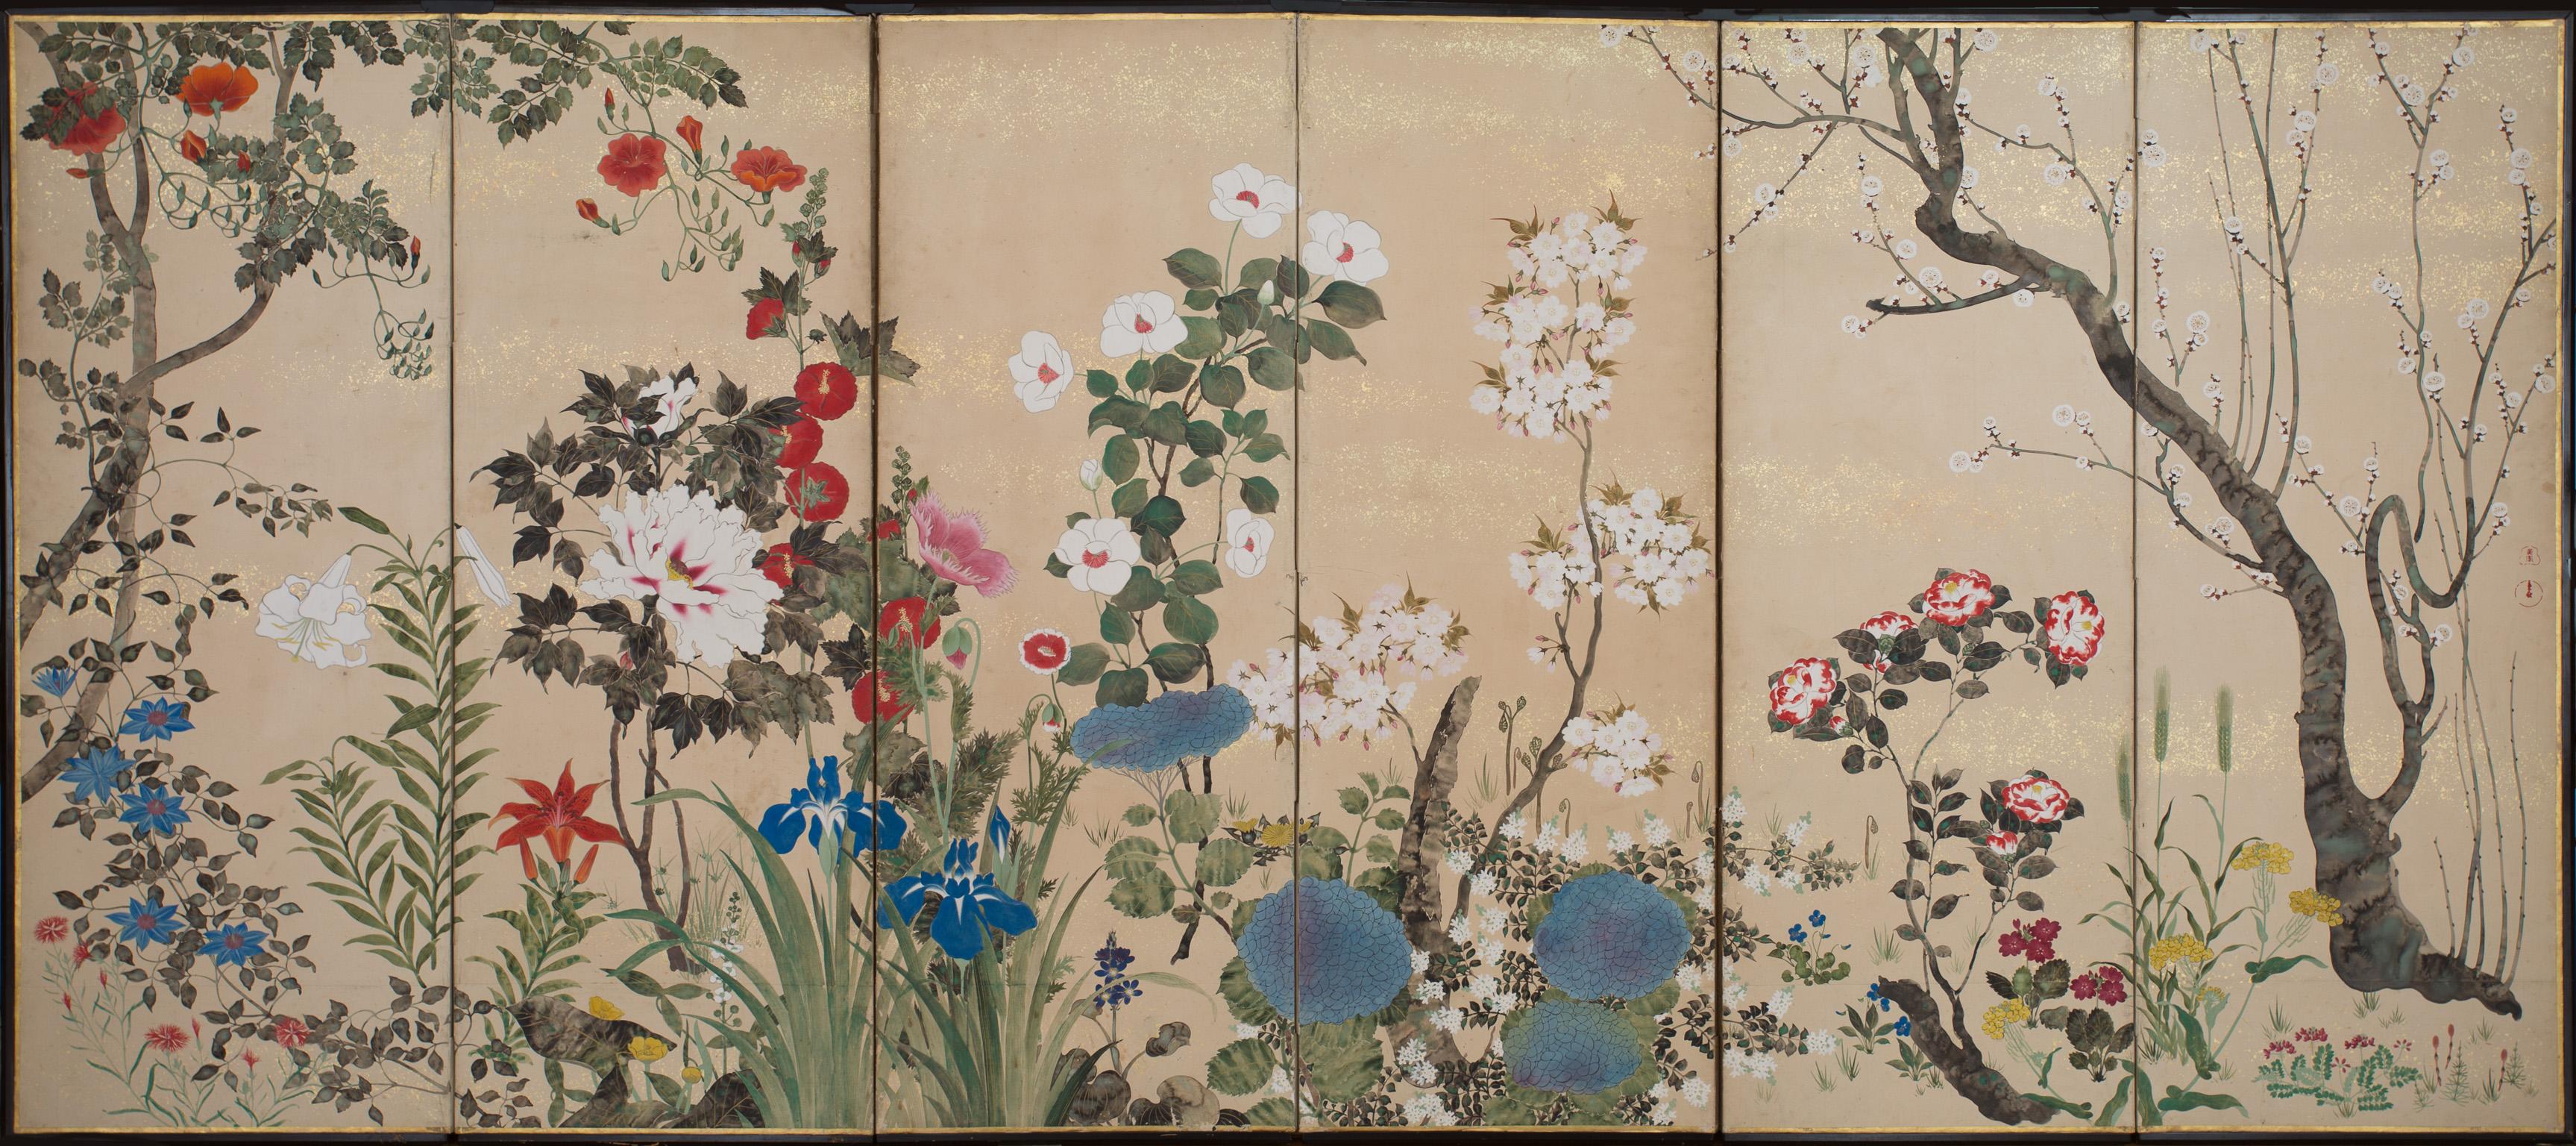 This pair of screens belongs to a genre of lyrical paintings of flowers, grasses, and other plants that flourished around the middle of the 17th century and became a specialty of the Sôtatsu studio. The use of a rather complex composition of